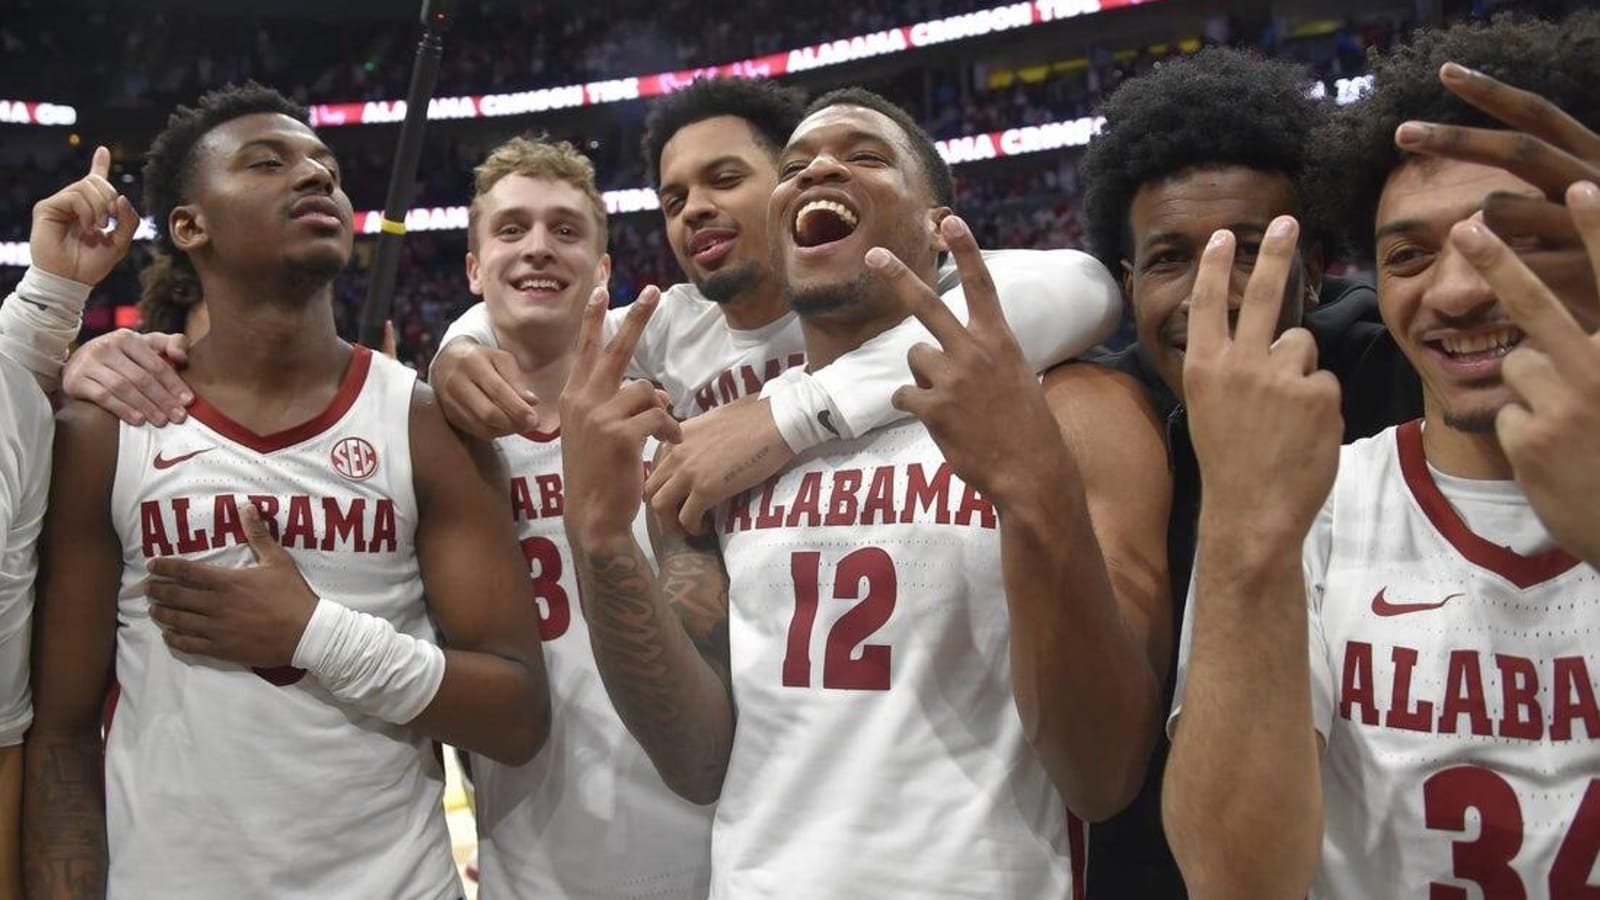 Let the Madness begin: Alabama top seed as bracket revealed